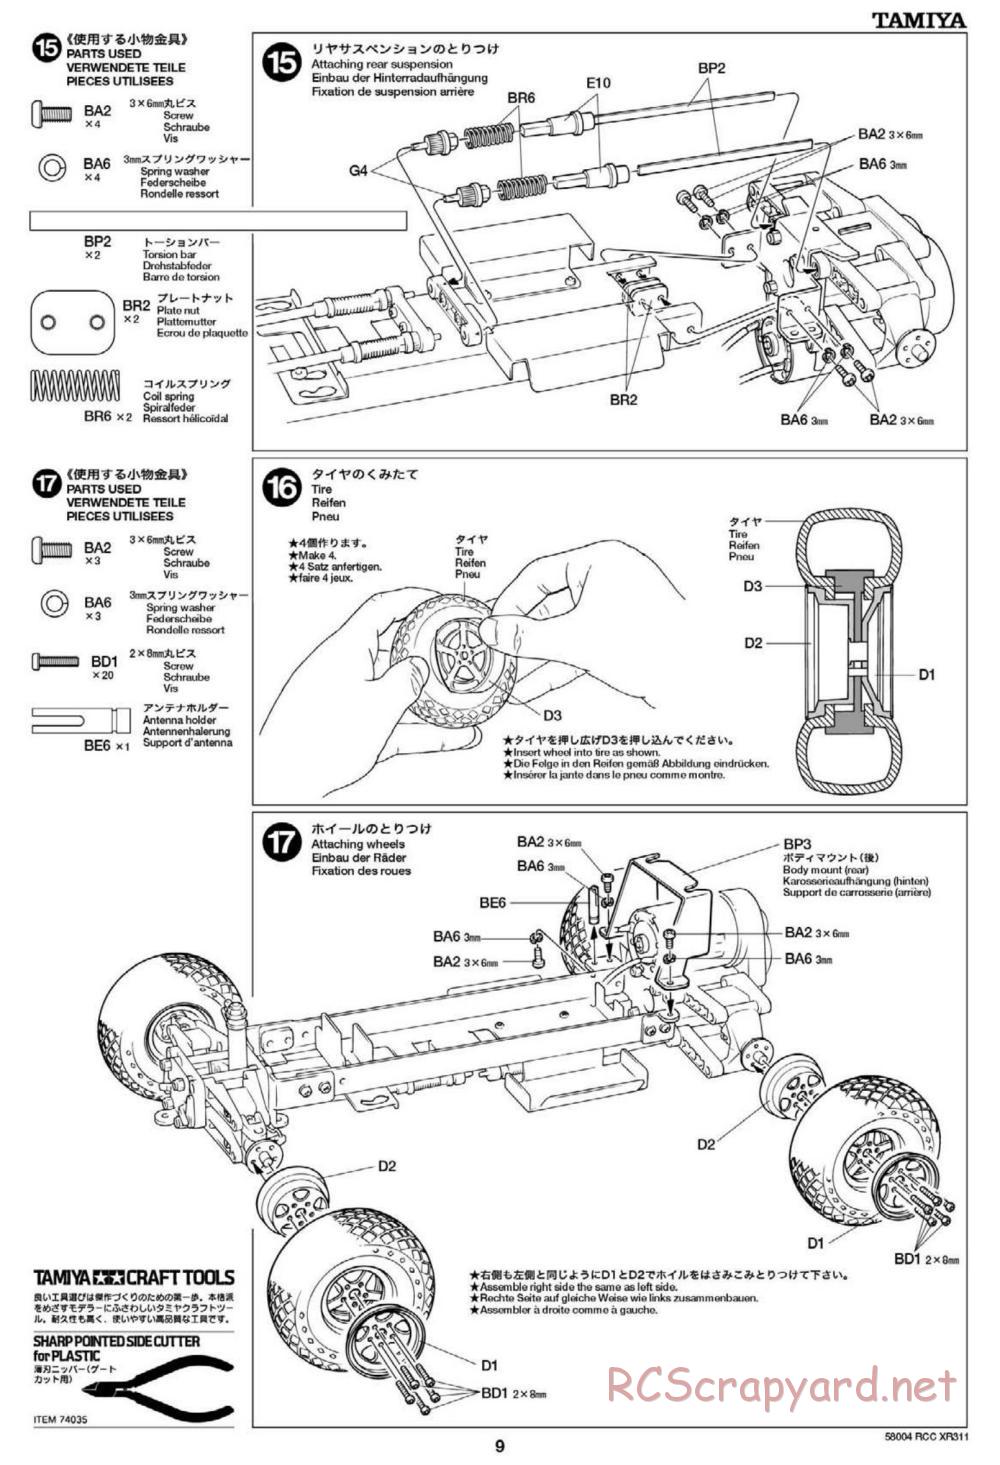 Tamiya - XR311 Combat Support Vehicle (2012) Chassis - Manual - Page 9